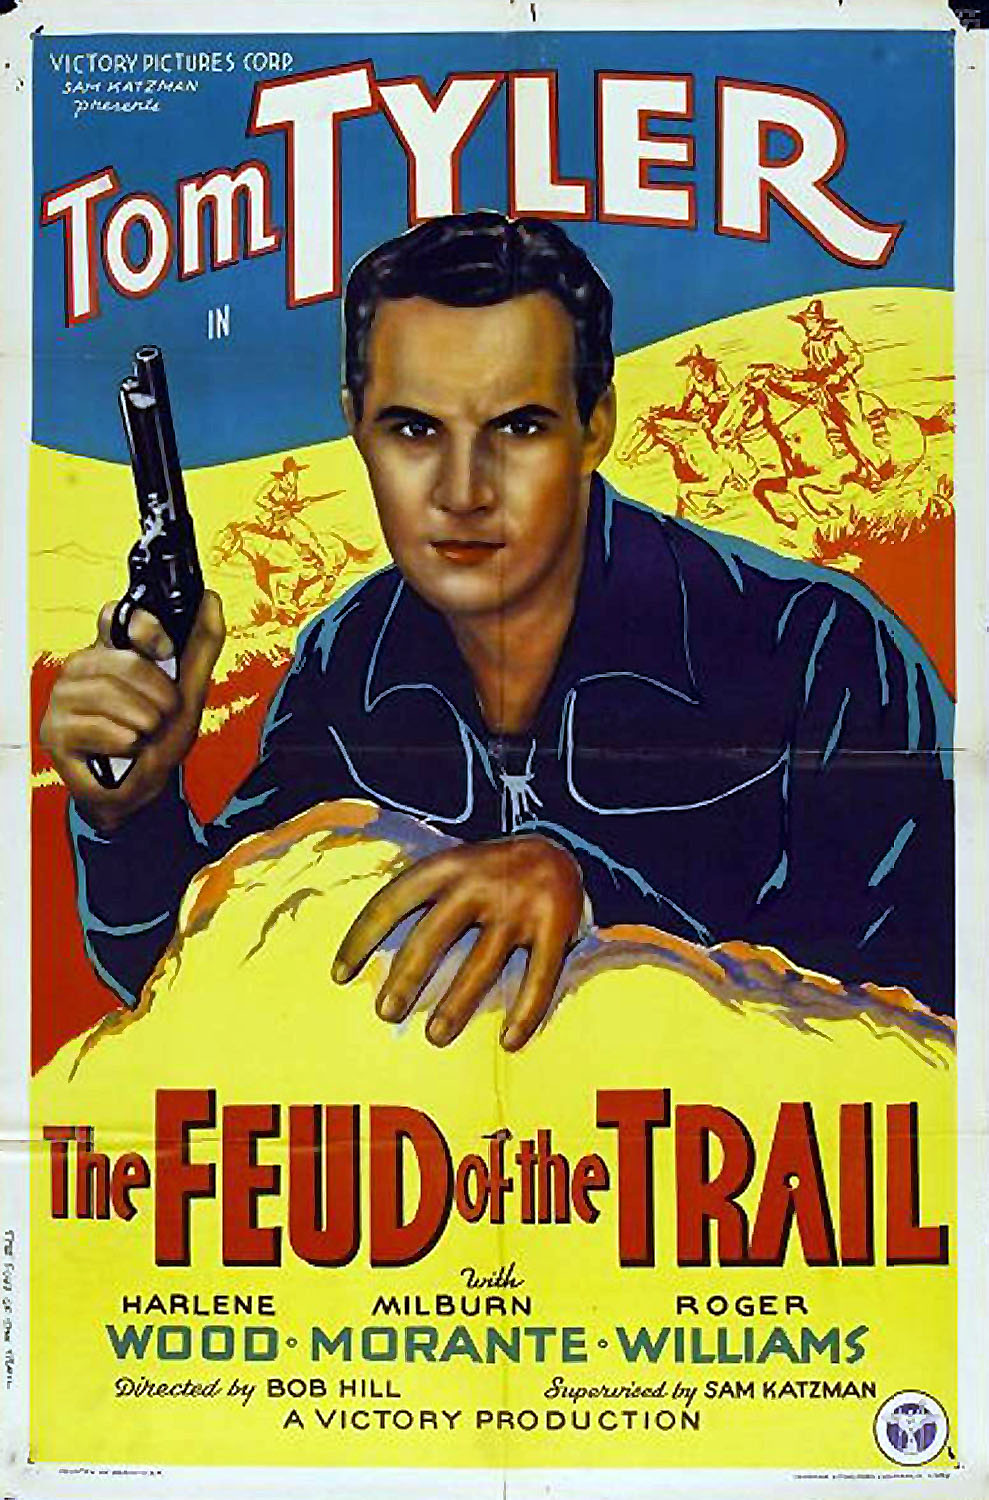 FEUD OF THE TRAIL